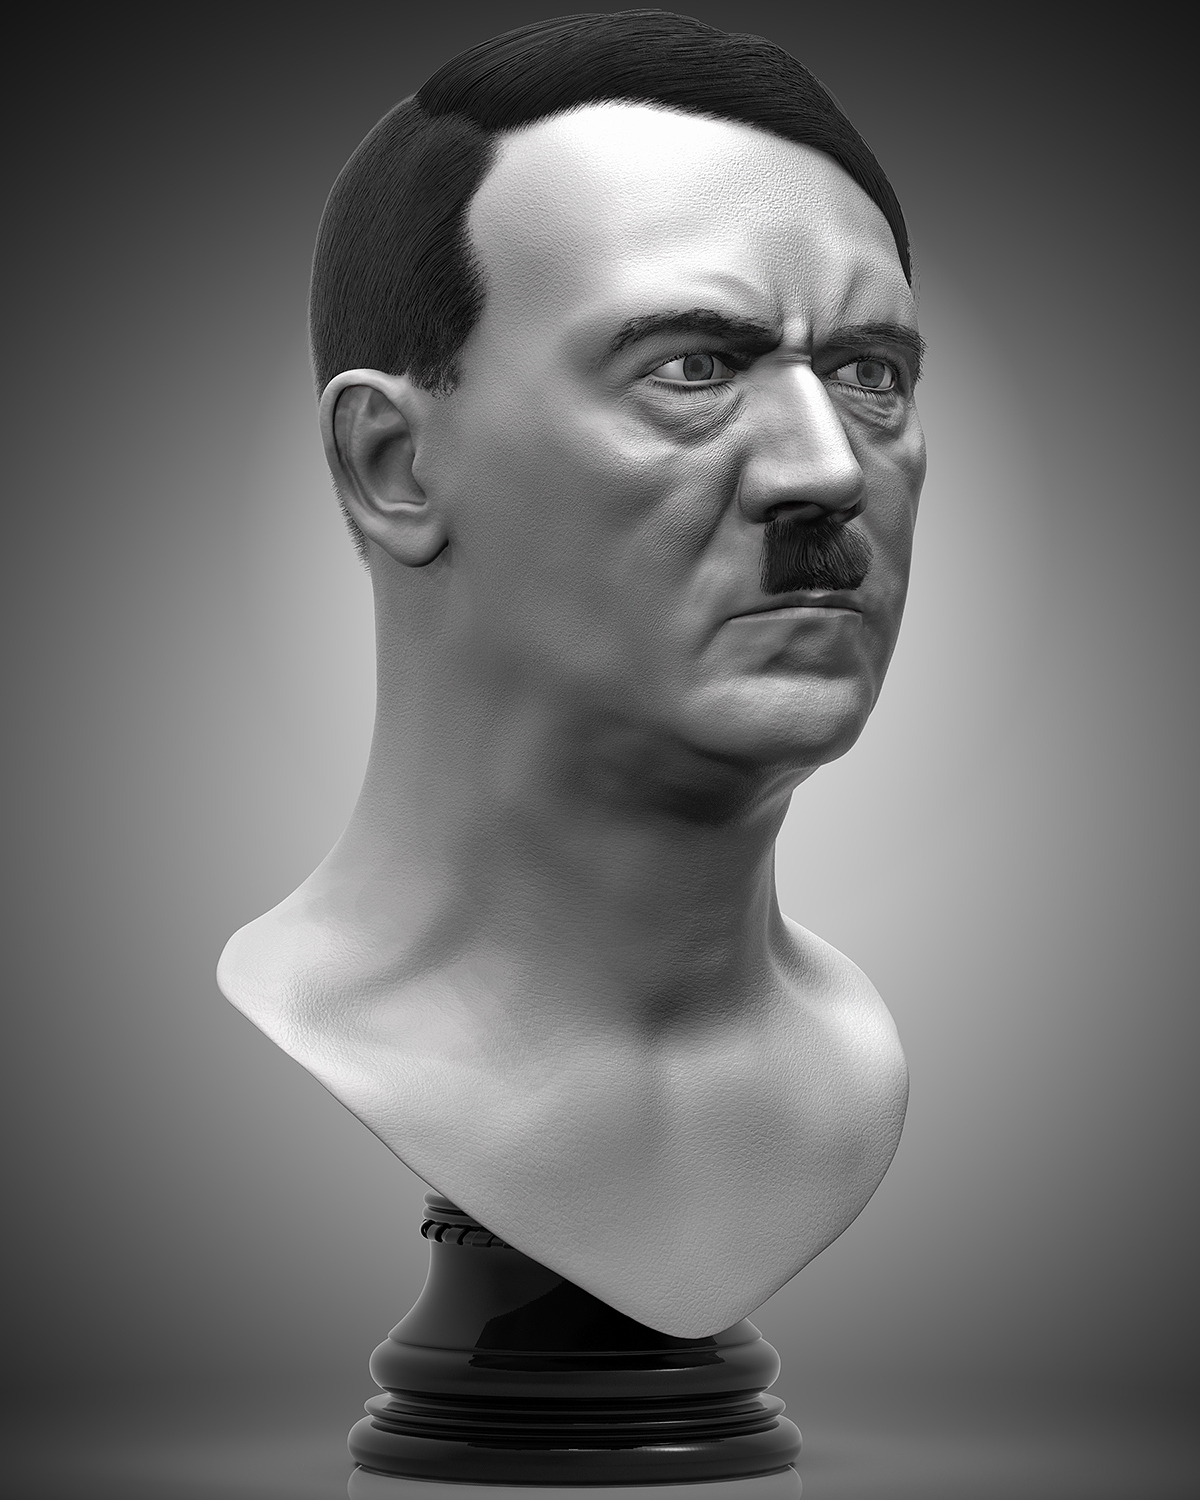 Bust of Adolf Hitler-Created by Esfandiyar Ebadi- Any kind of changes or misuse by any group or .jpg